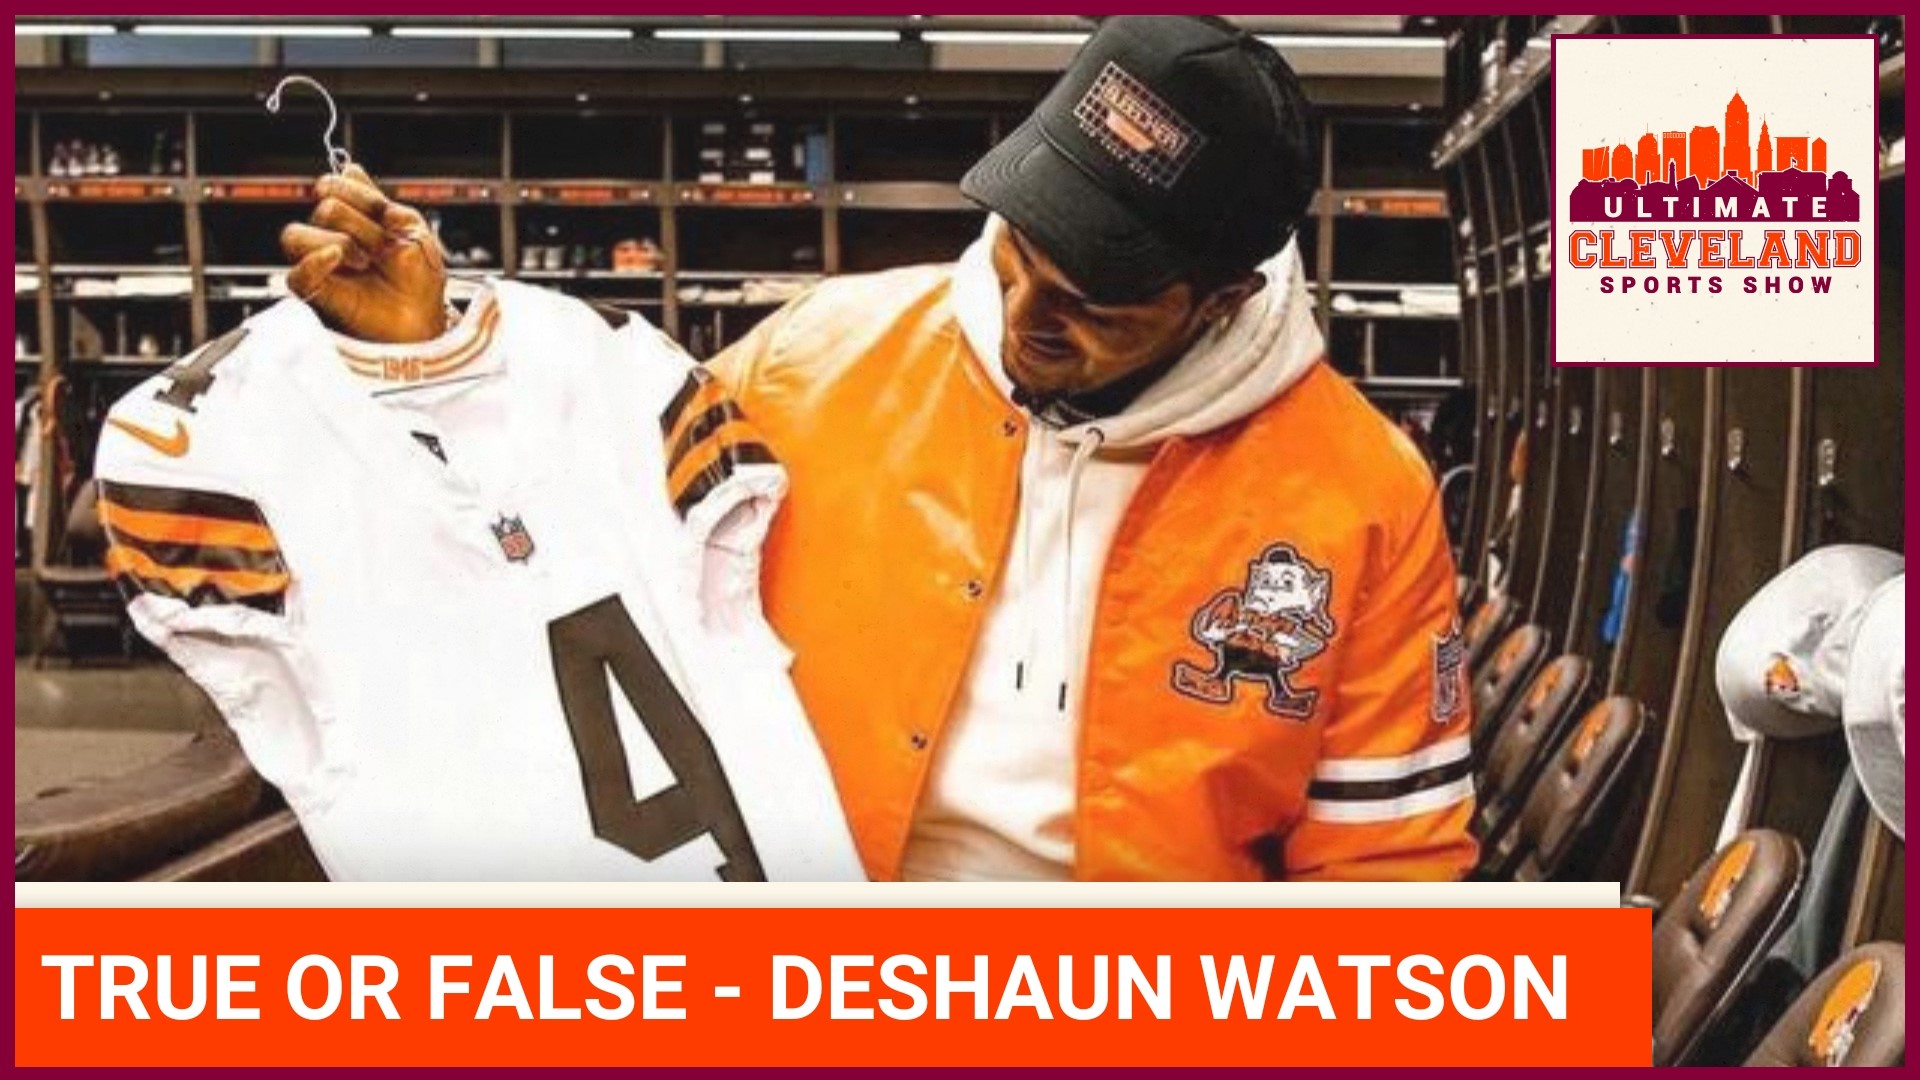 The UCSS crew plays their favorite game, true or false and this time the subject is Deshaun Watson.